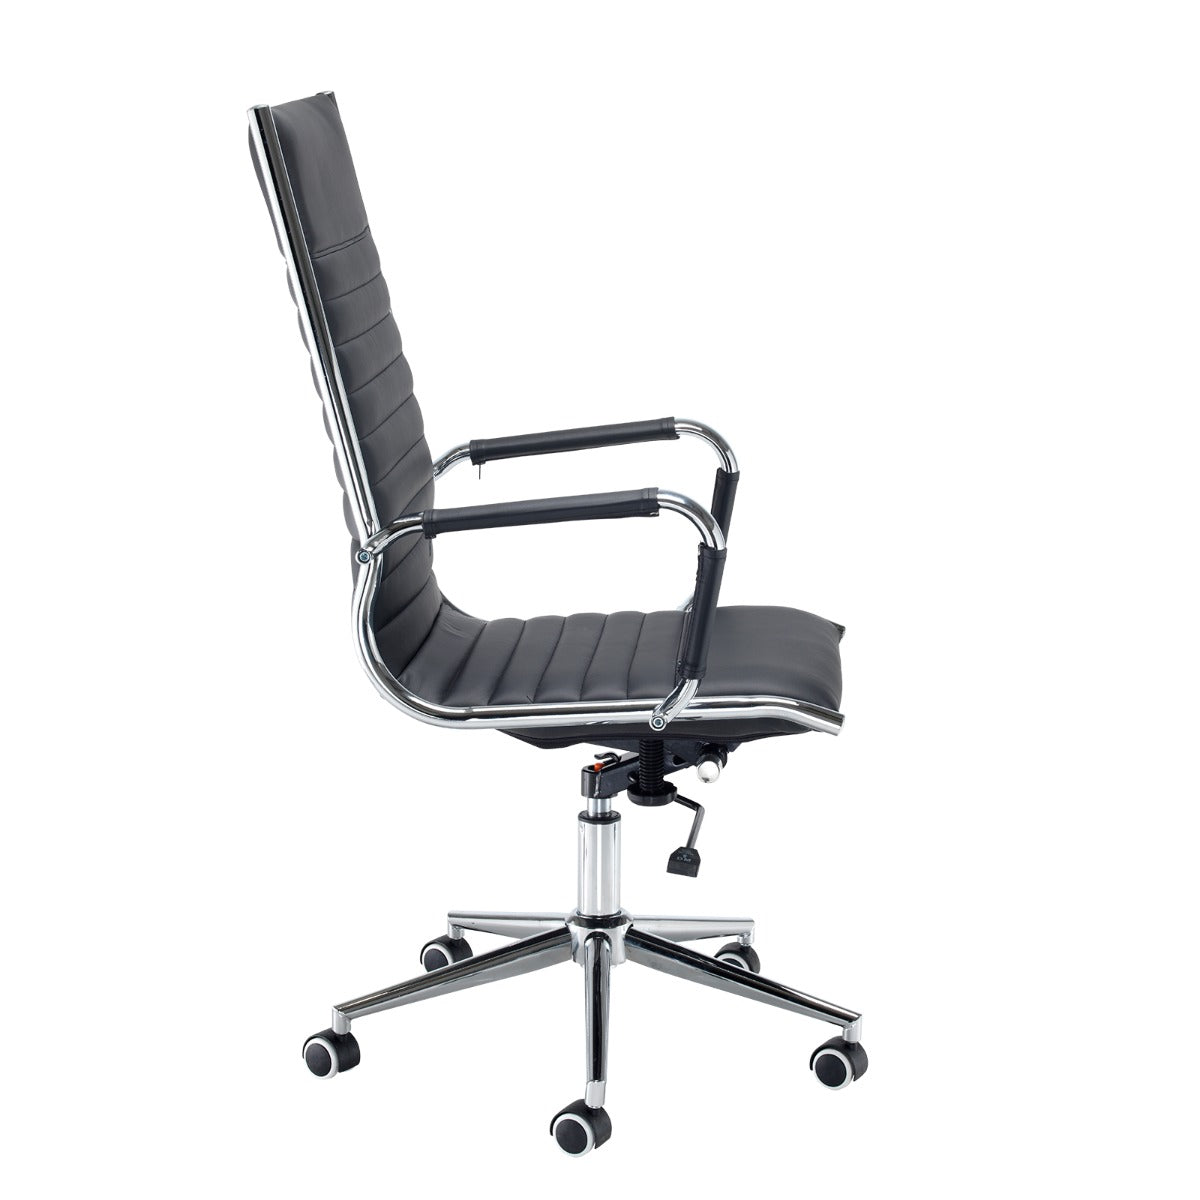 Bari High Back Eames Style Office Chair